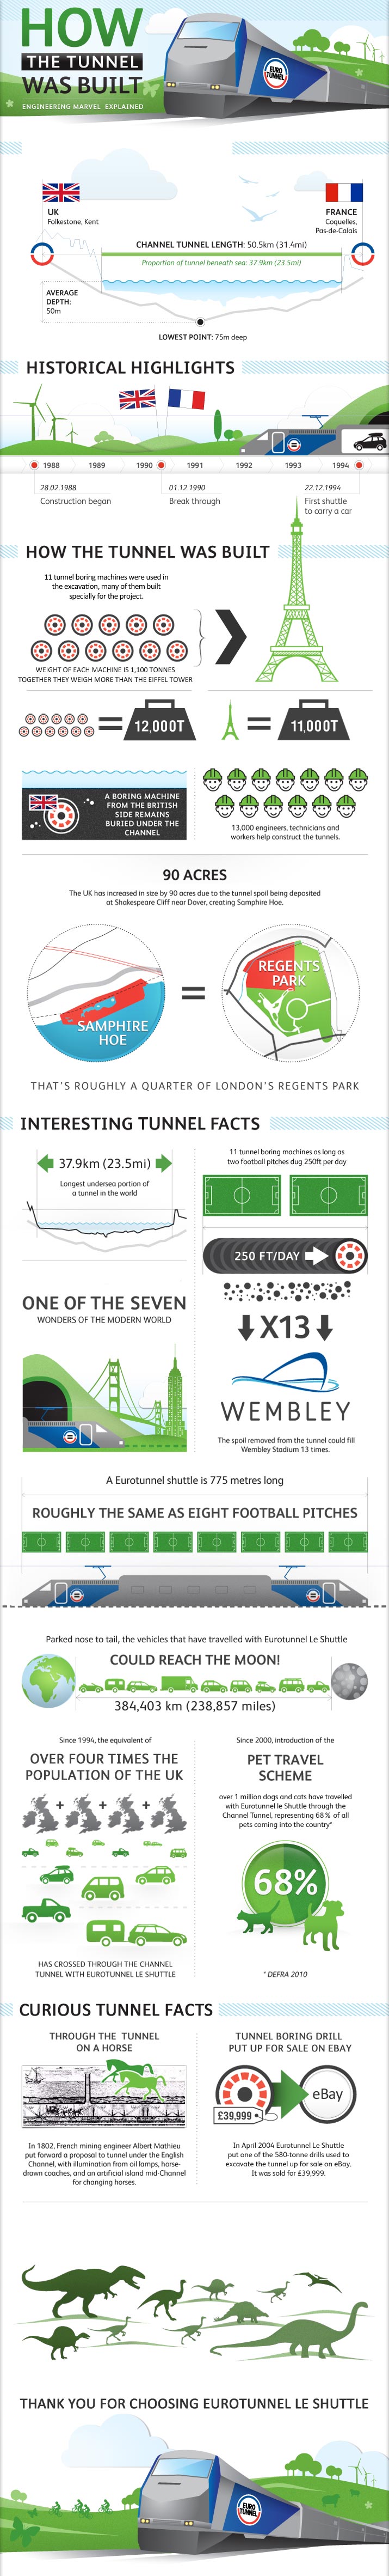 How the (English) Channel Tunnel Was Built